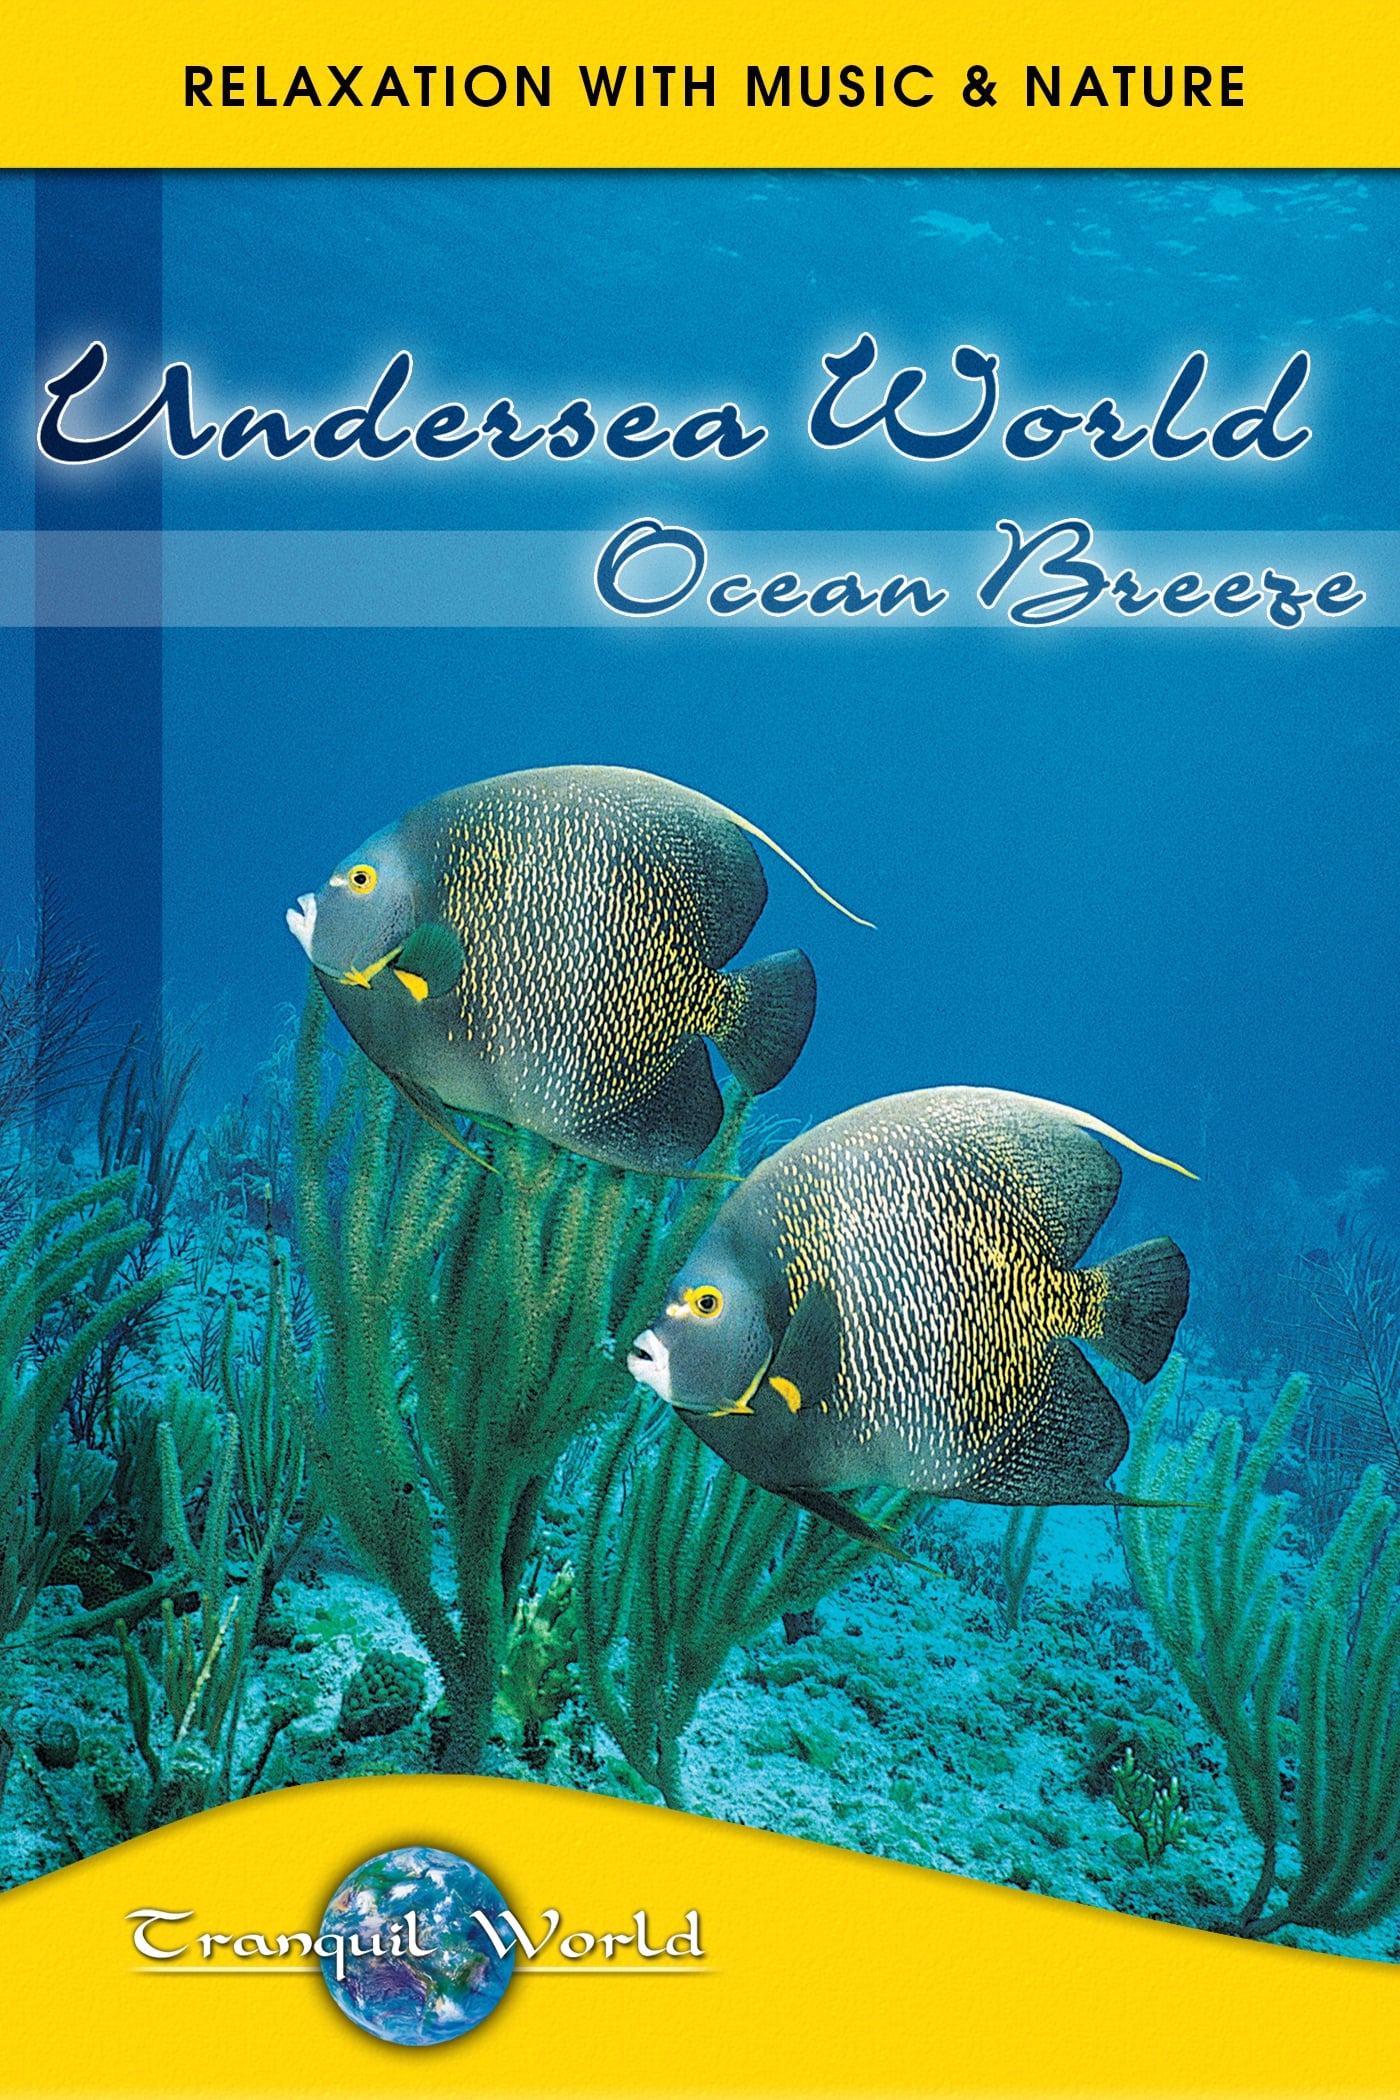 Undersea World - Ocean Breeze: Tranquil World - Relaxation with Music & Nature on FREECABLE TV